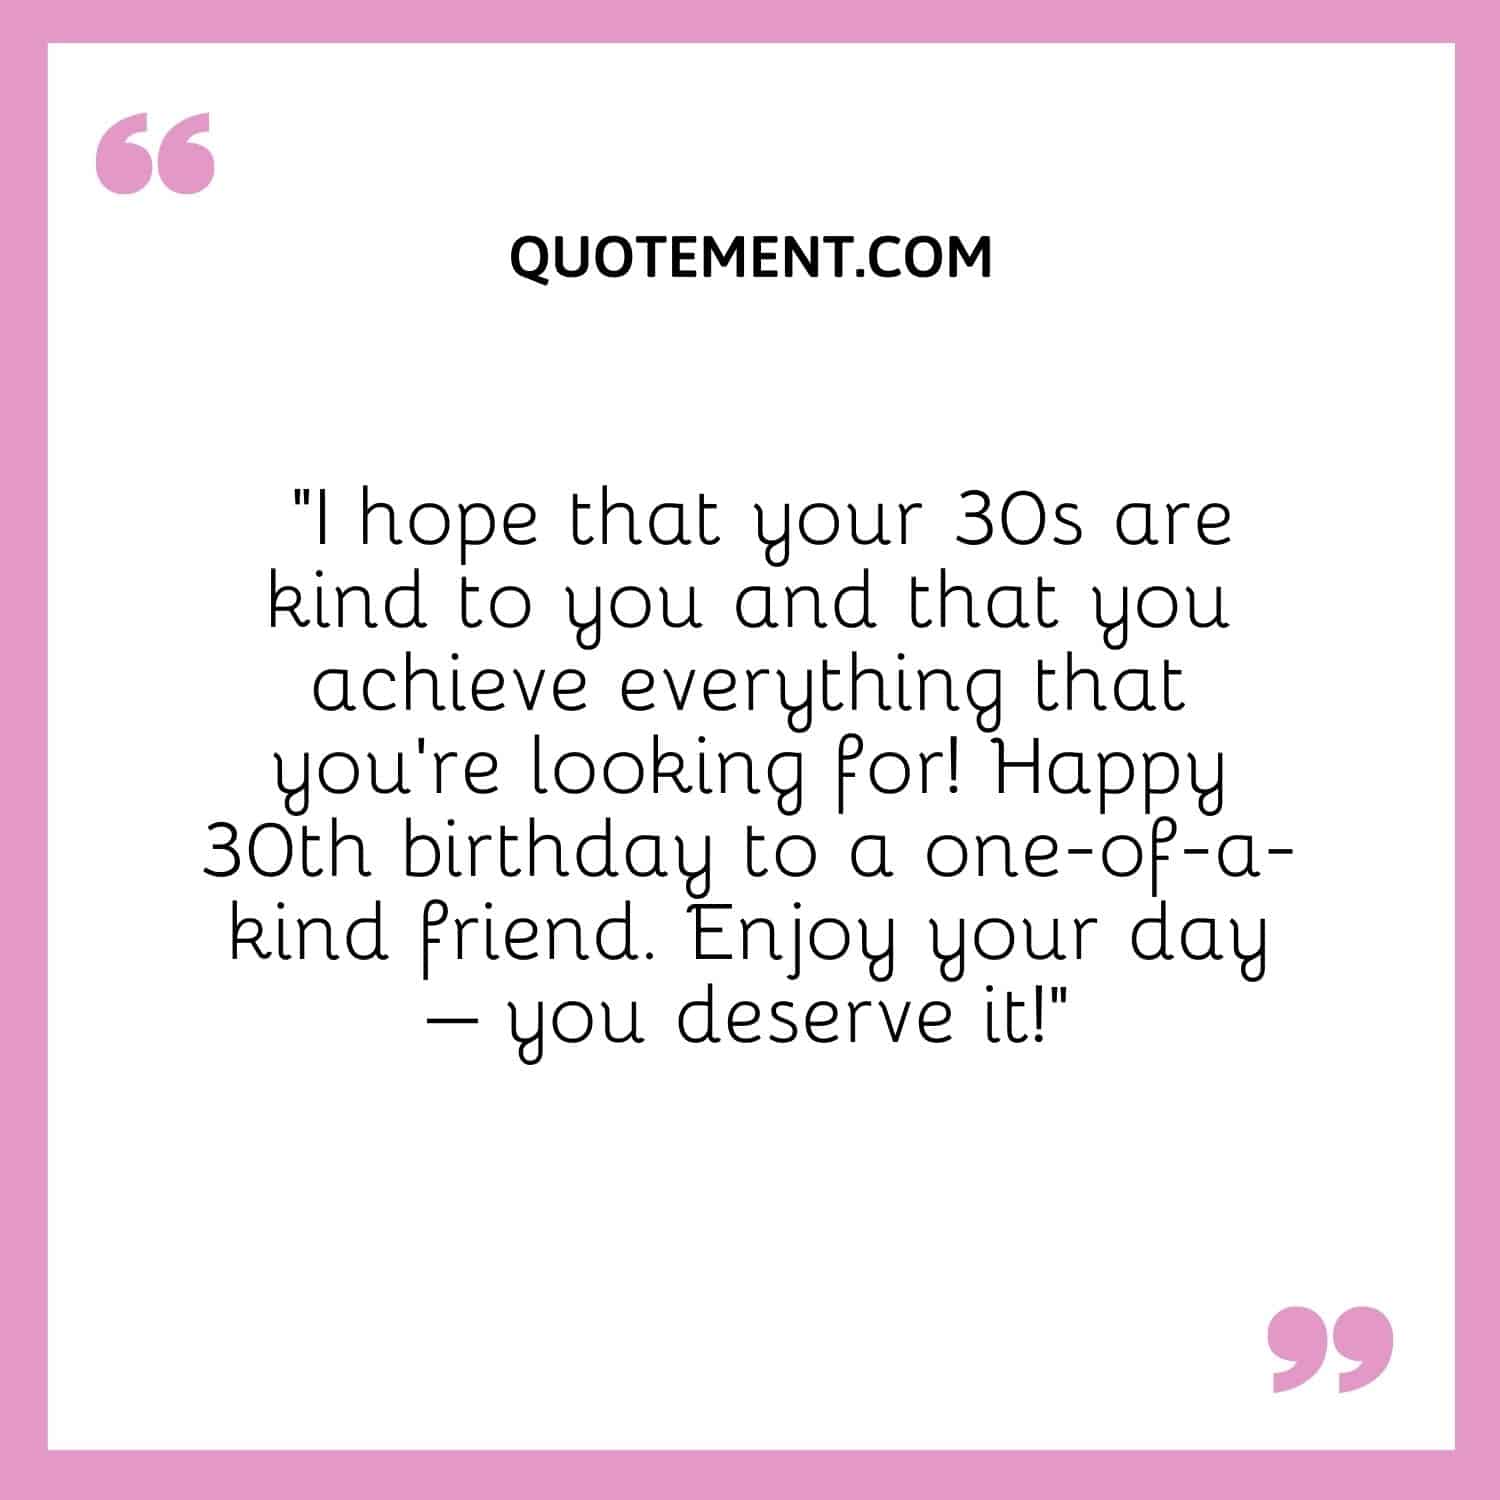 “I hope that your 30s are kind to you and that you achieve everything that you’re looking for! Happy 30th birthday to a one-of-a-kind friend. Enjoy your day – you deserve it!”